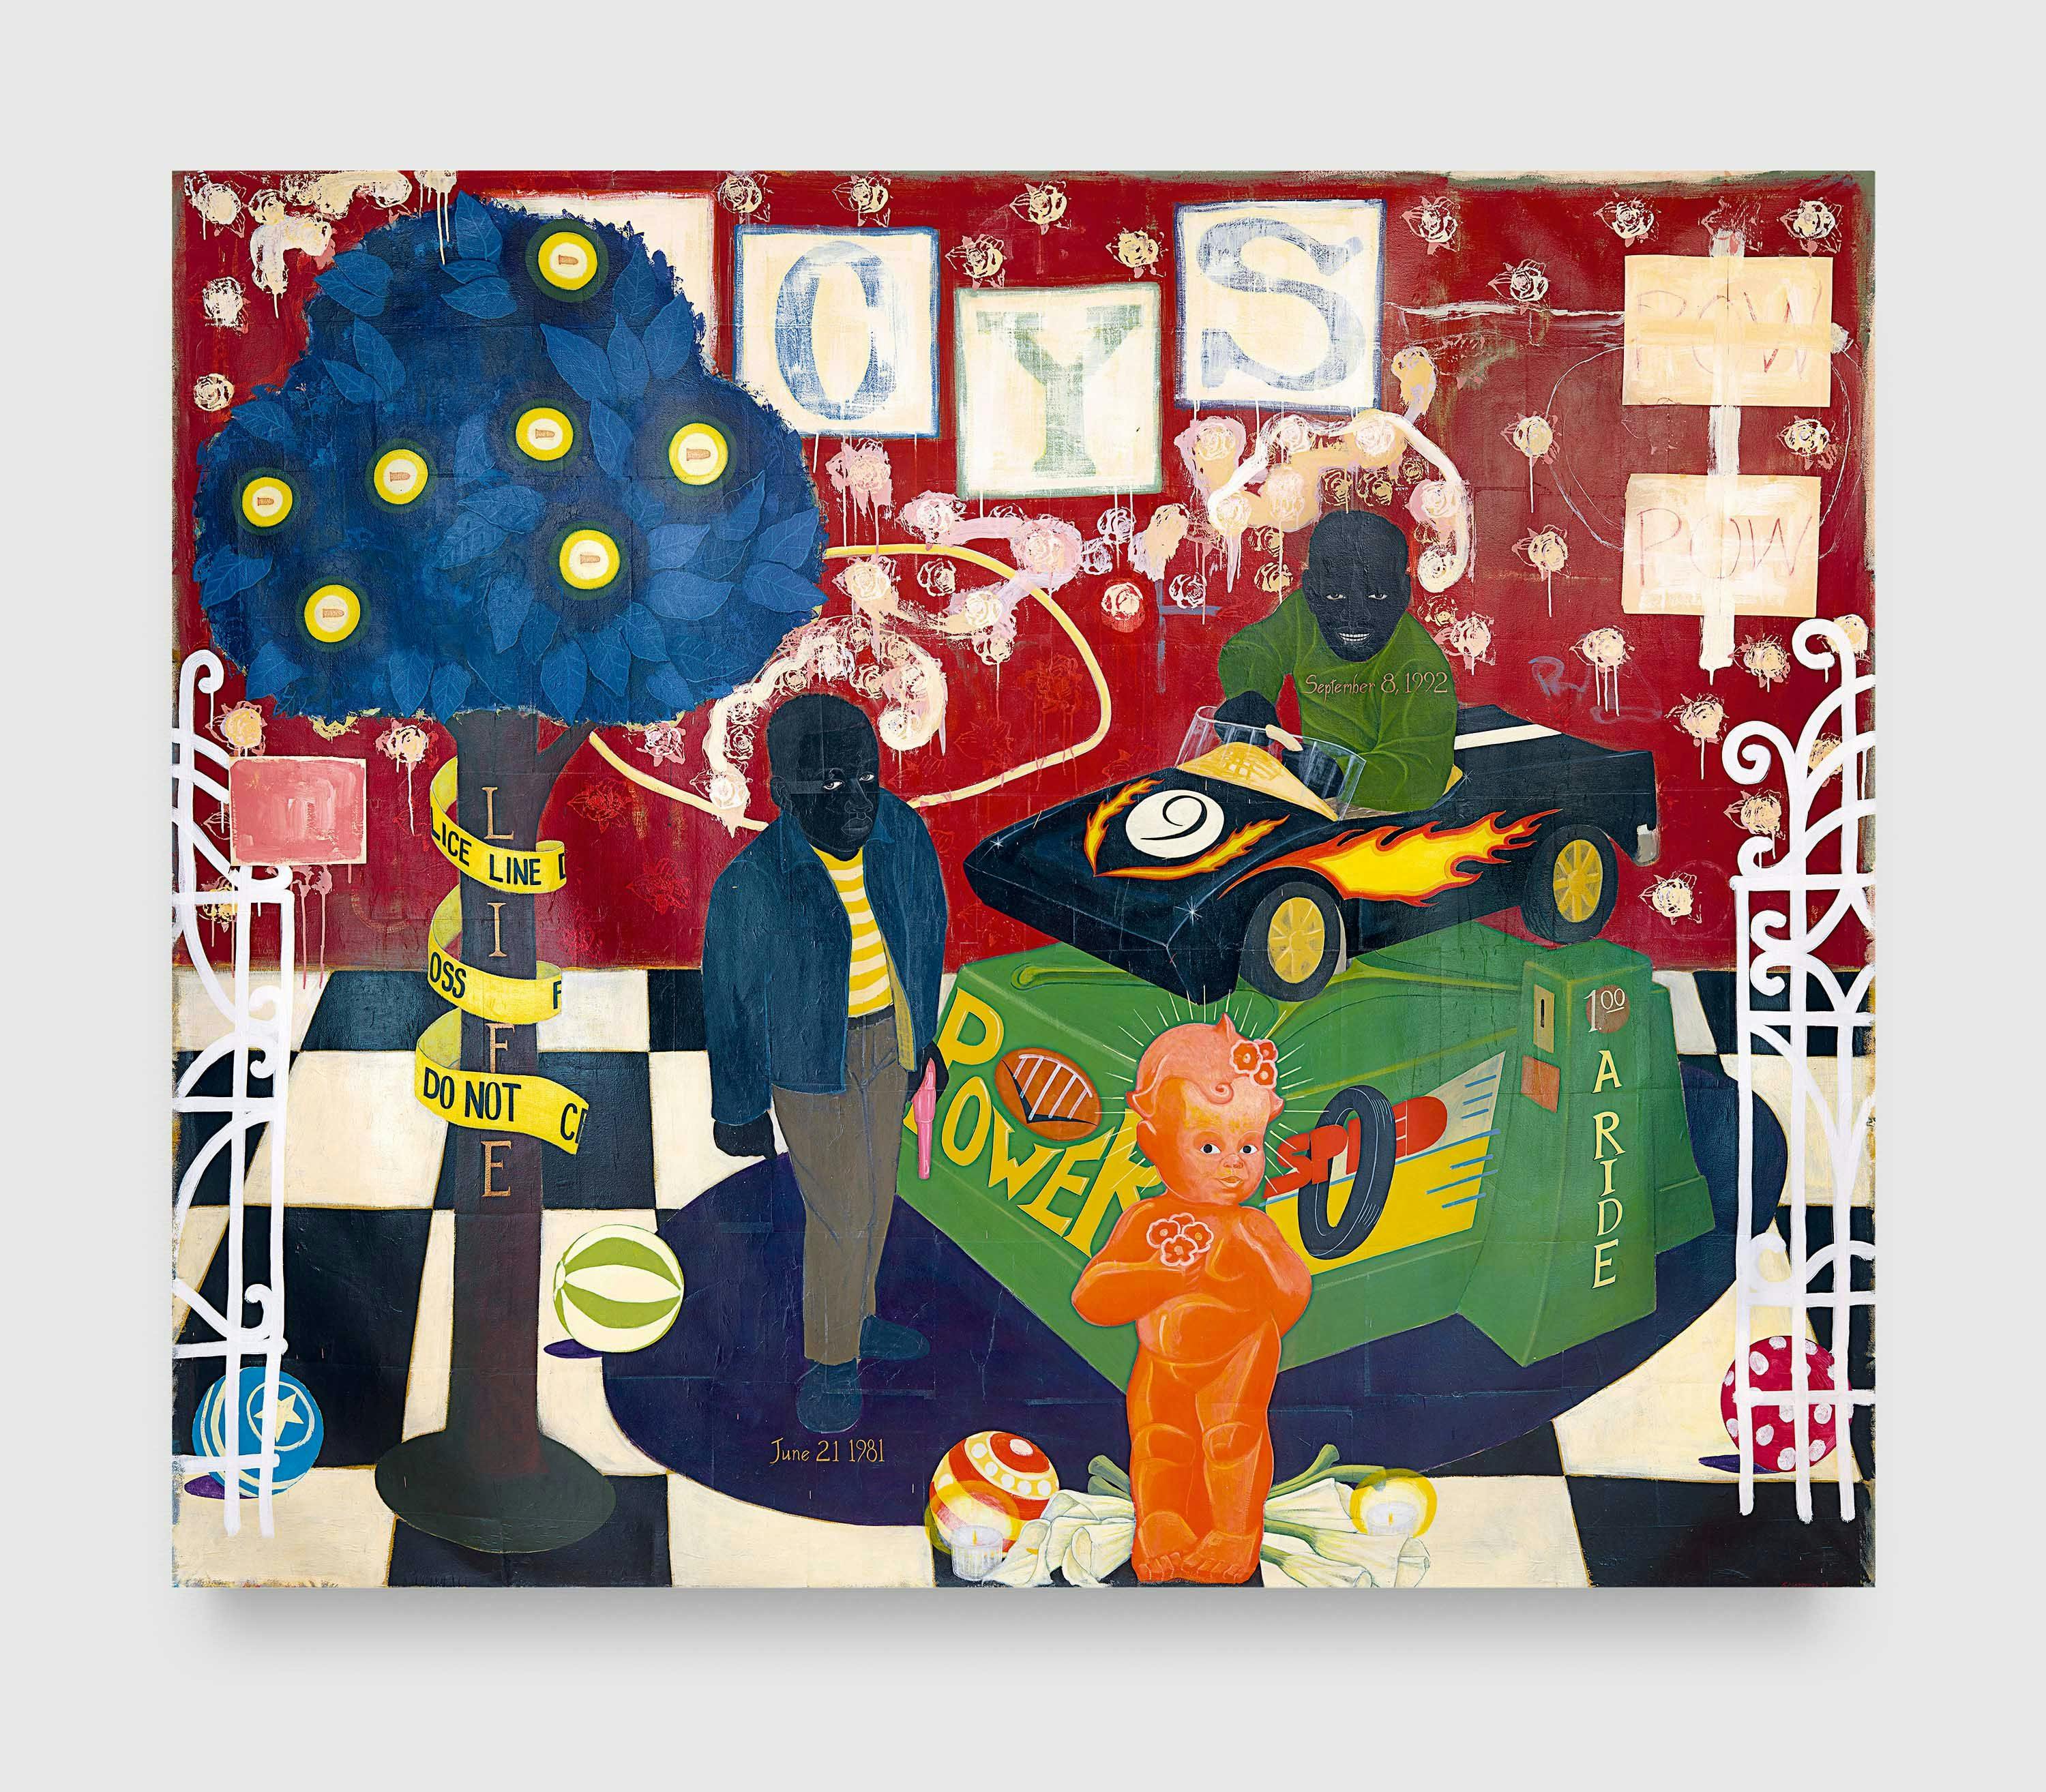 A painting by Kerry James Marshall, titled The Lost Boys, dated 1993.